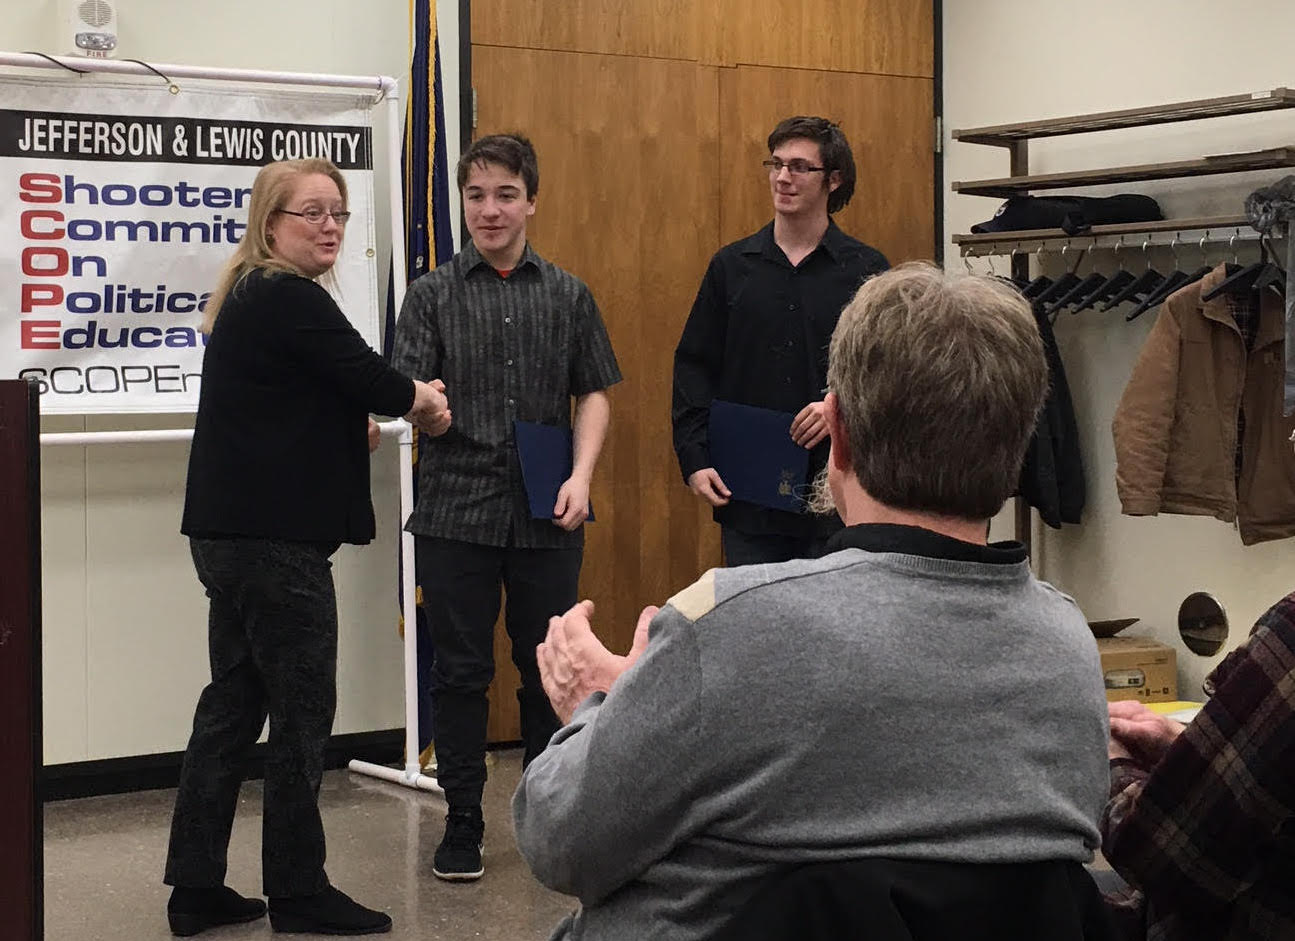 Assemblywoman Addie A.E. Jenne congratulates South Jefferson Central School students Nicolas Luciani, and Austin Papazian for winning the second prize of $75 in the Jefferson-Lewis Counties chapter of SCOPE essay writing contest.